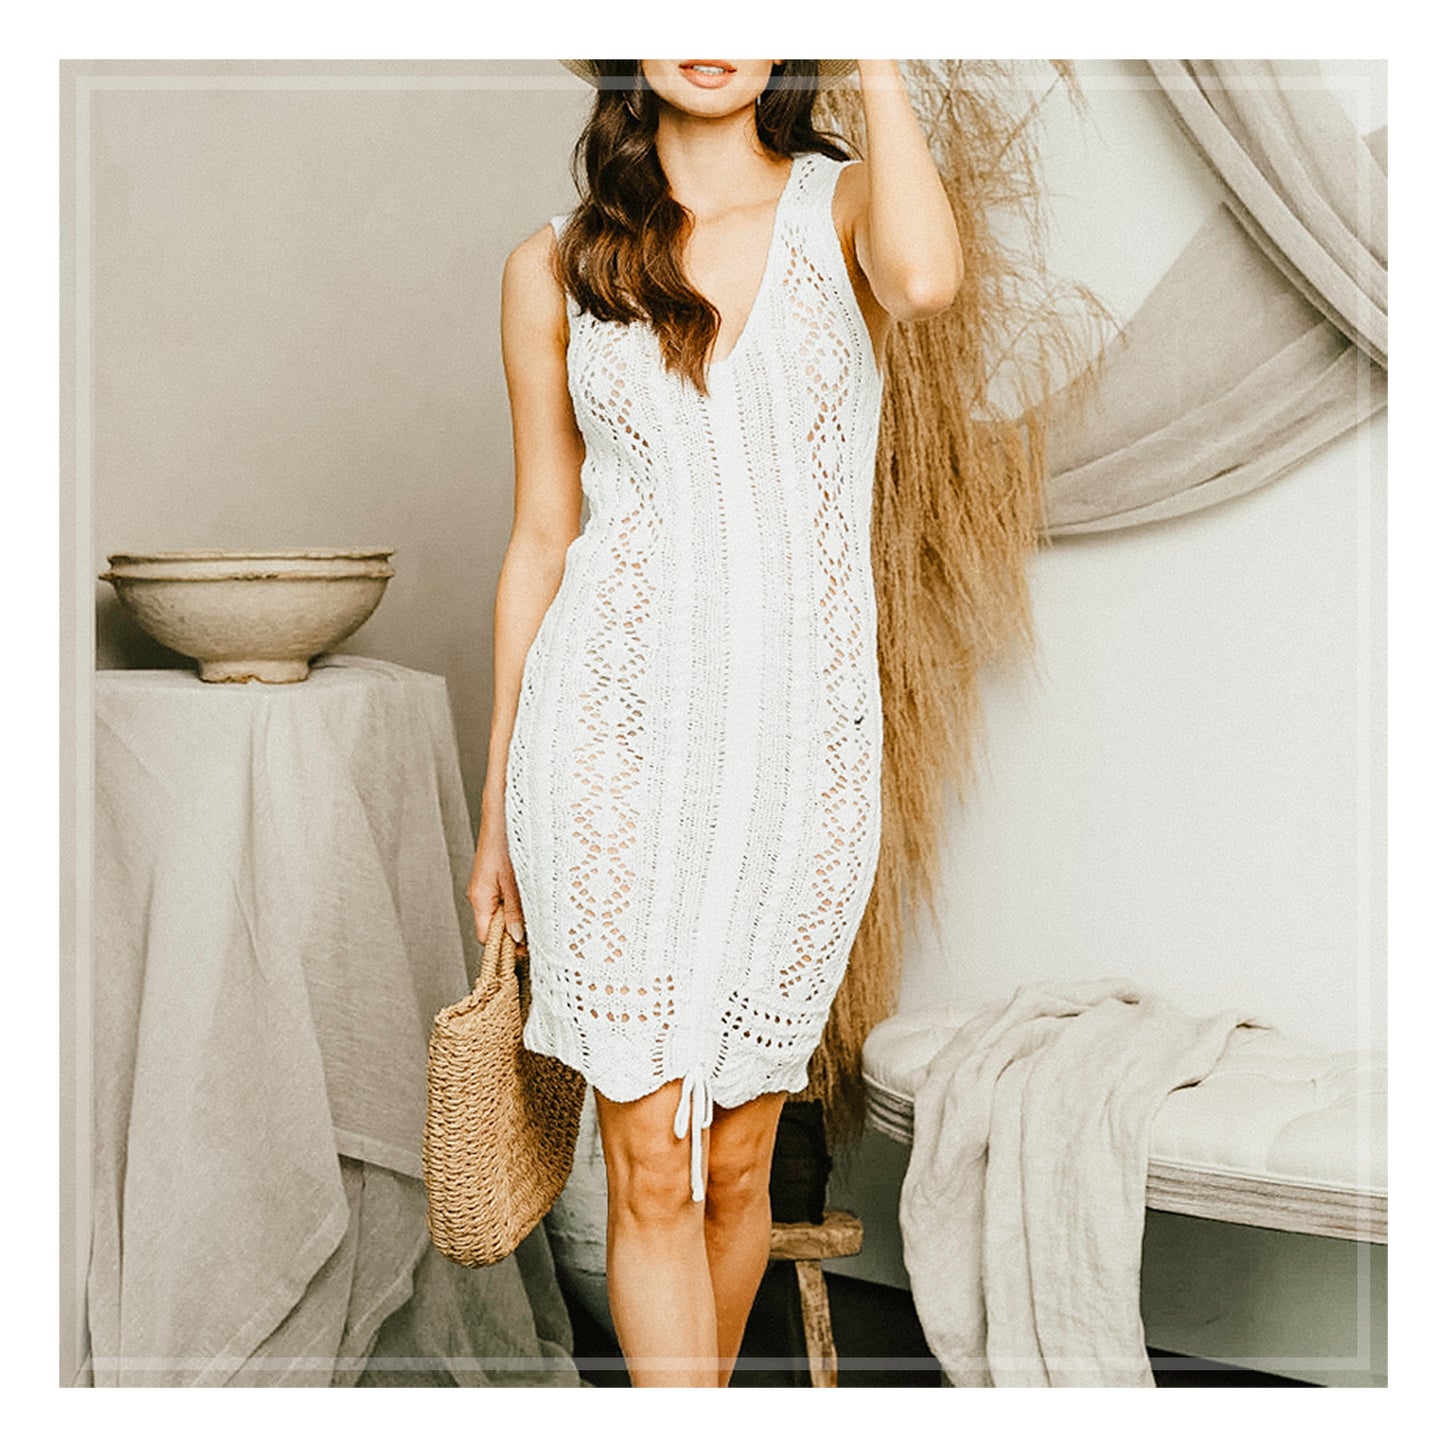 The Crochet Cover up Dress